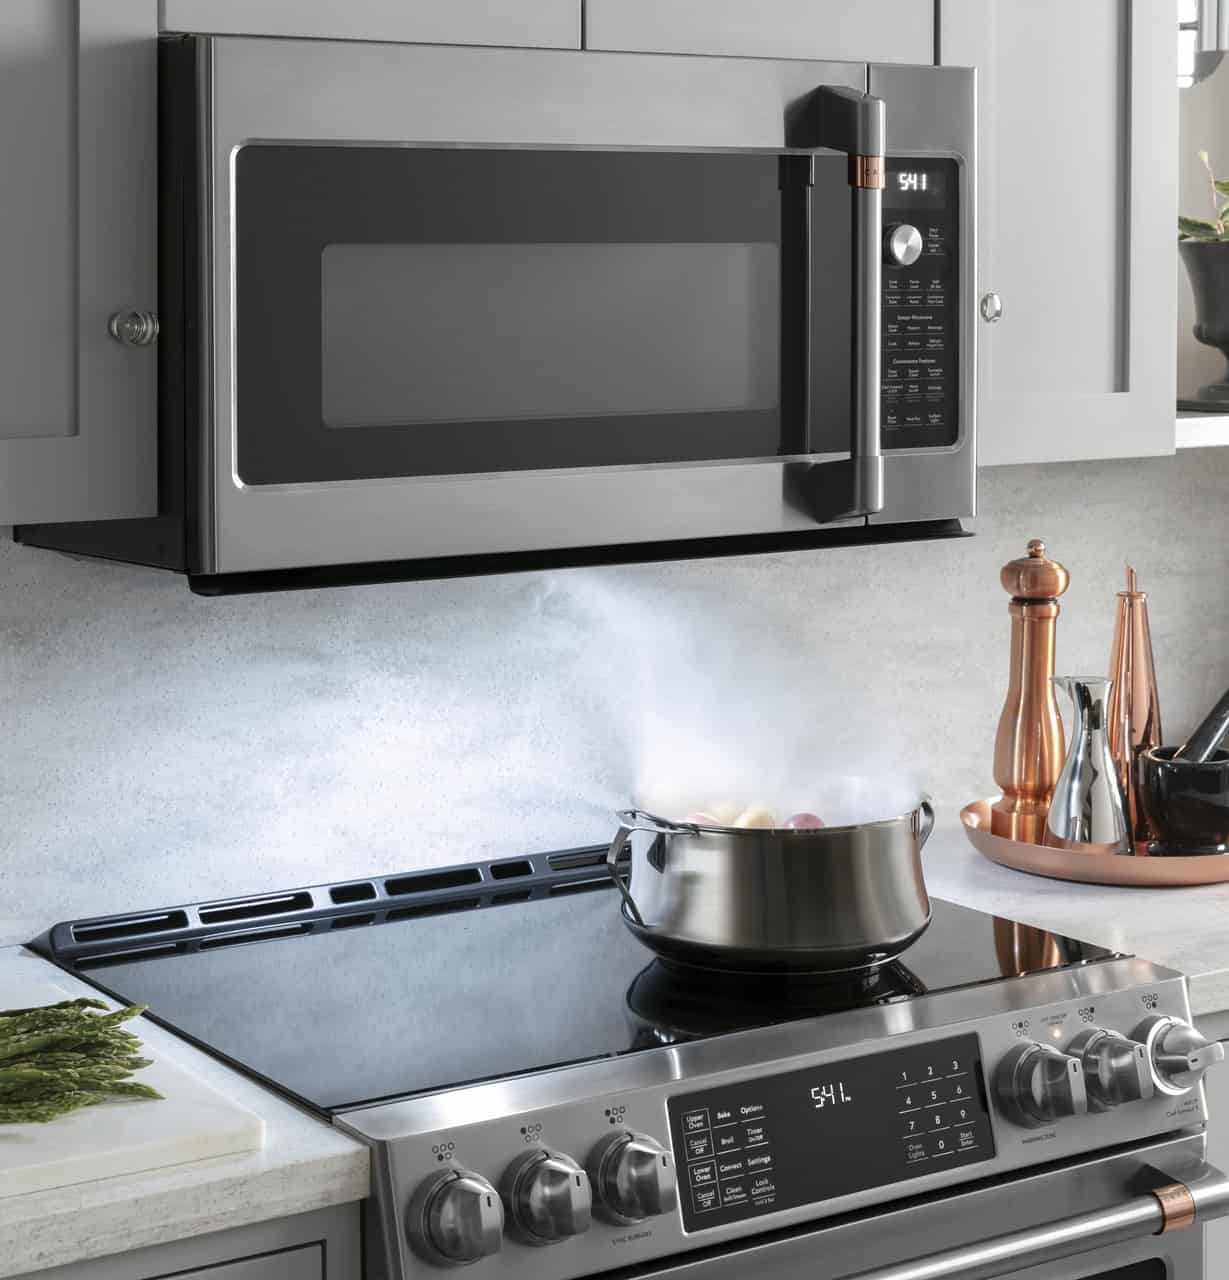 How high should a microwave be above the stove during the cooking